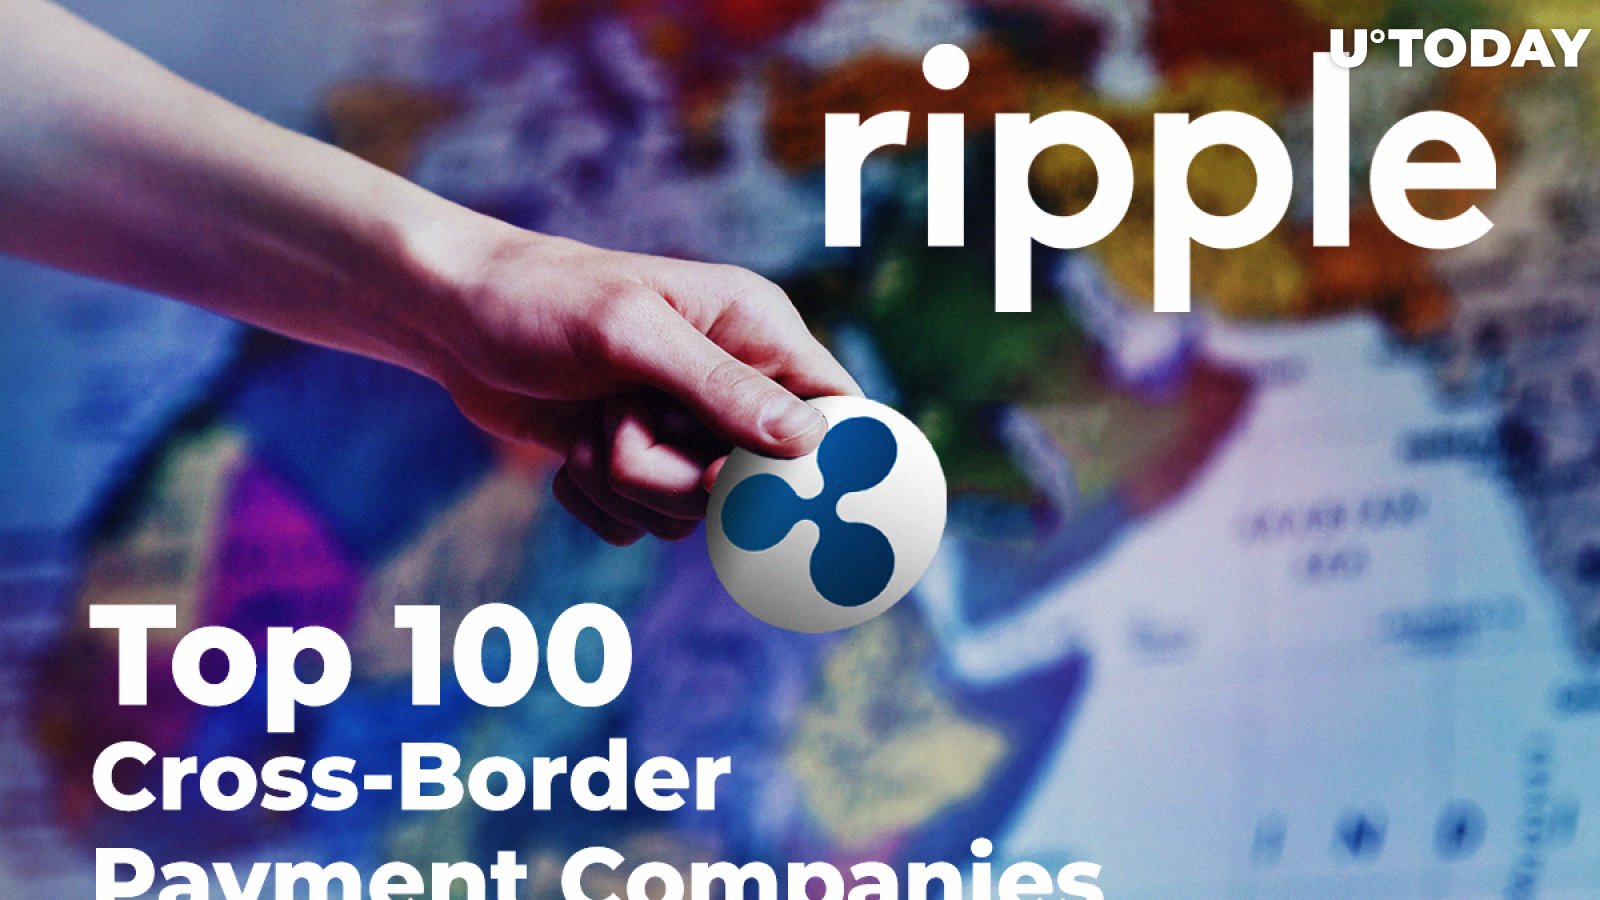 Ripple Makes It to Top 100 Cross-Border Payment Companies